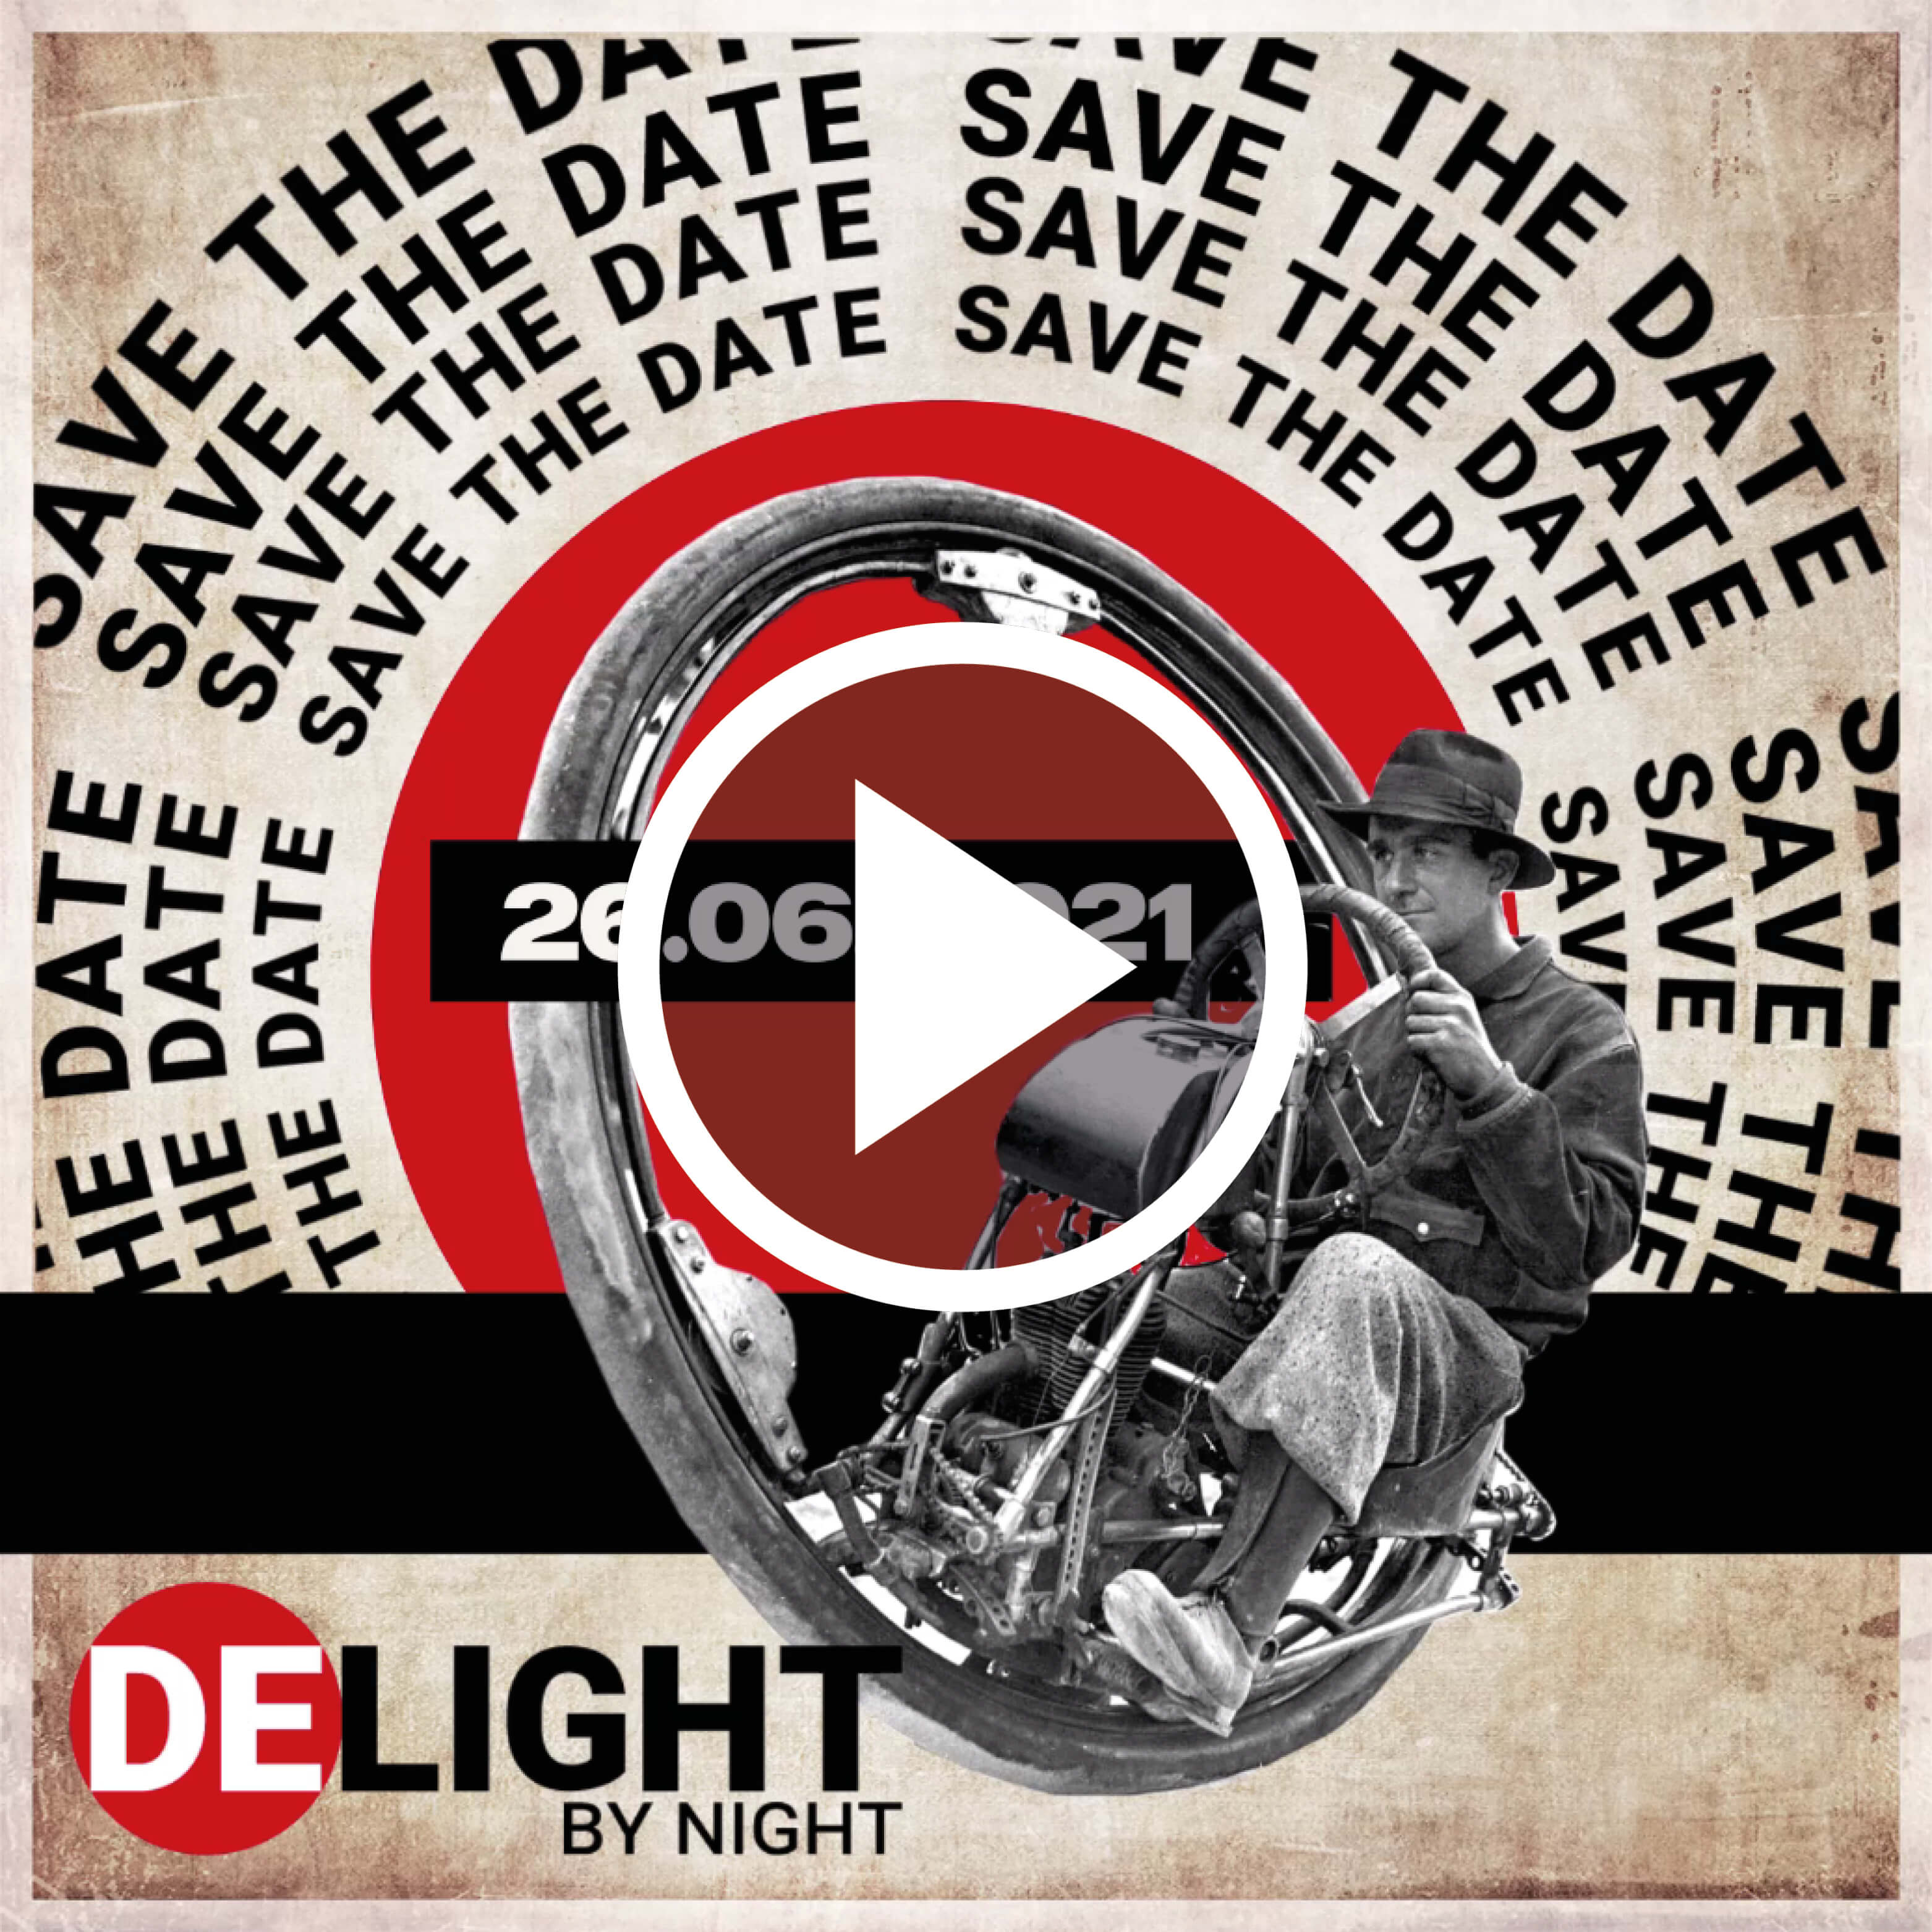 Delight by night – Save the date - Instagram-Post